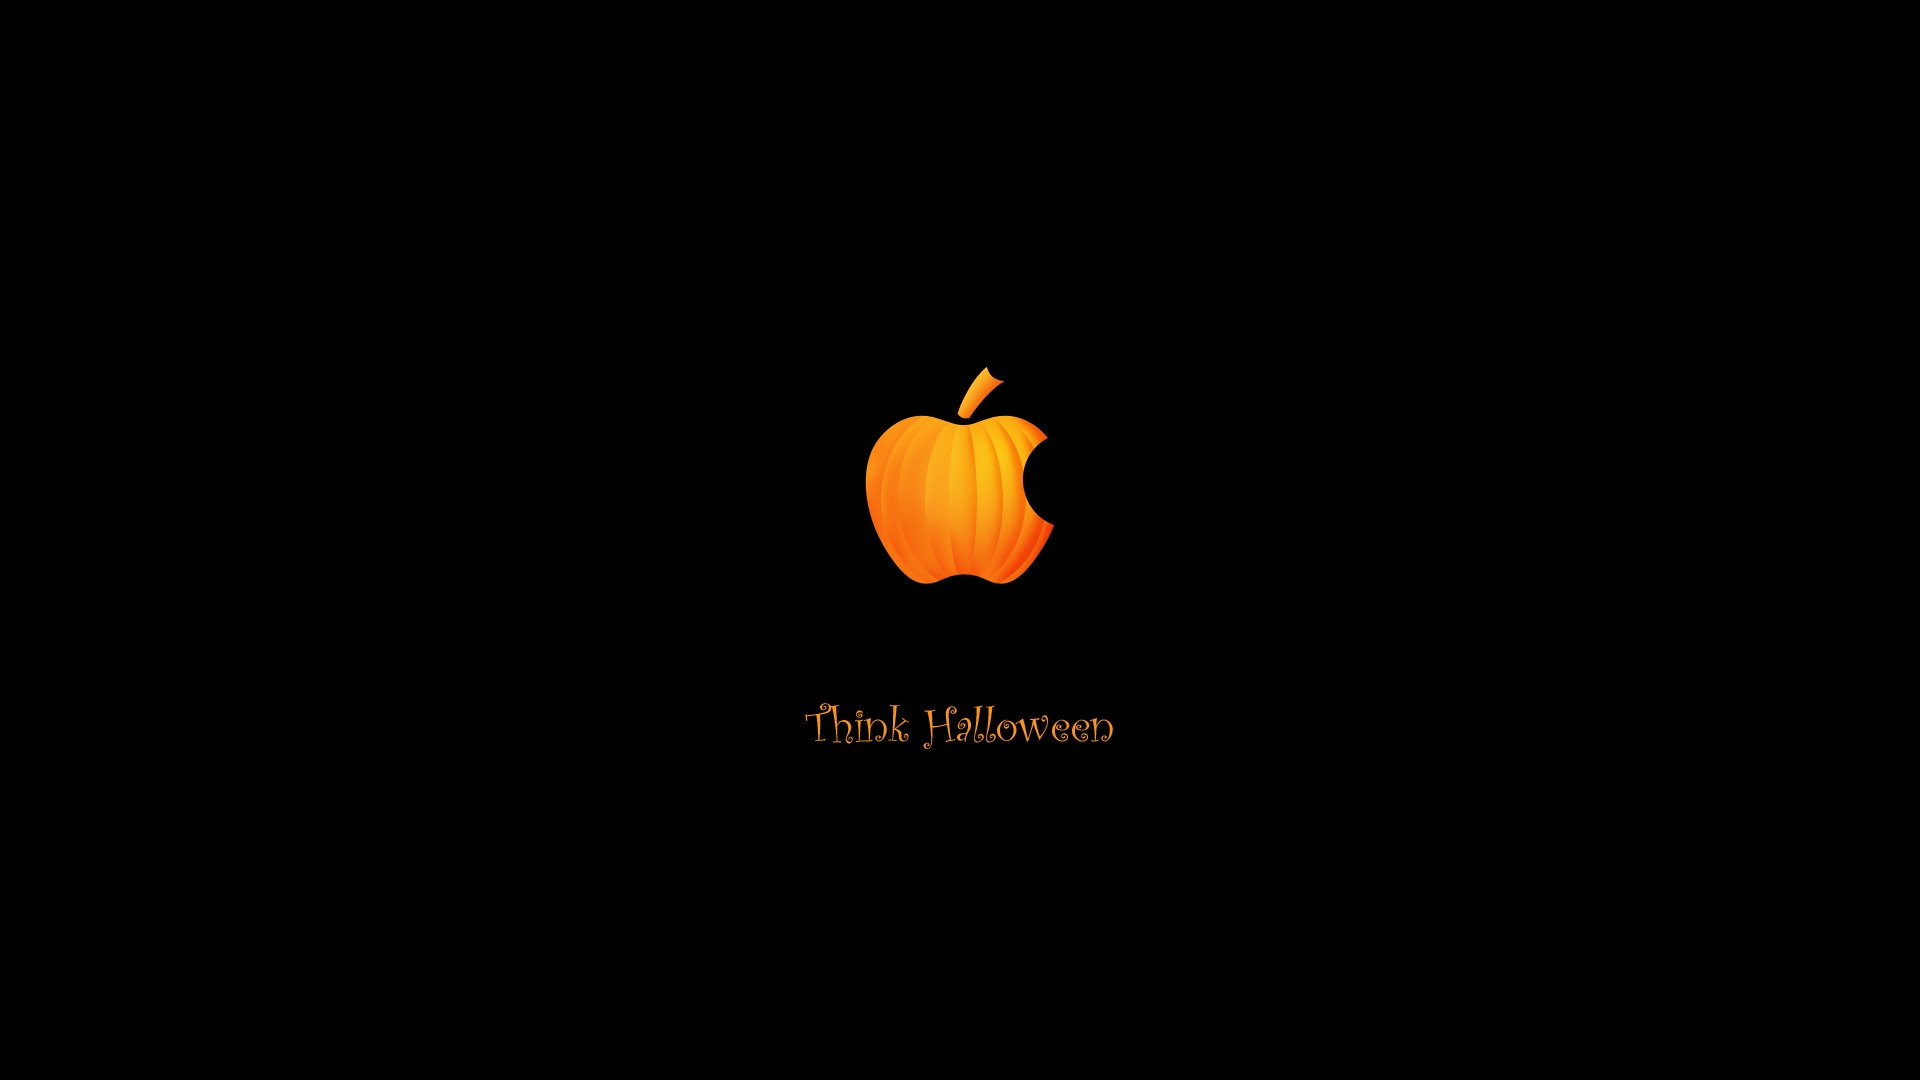 Think Halloween for 1920 x 1080 HDTV 1080p resolution